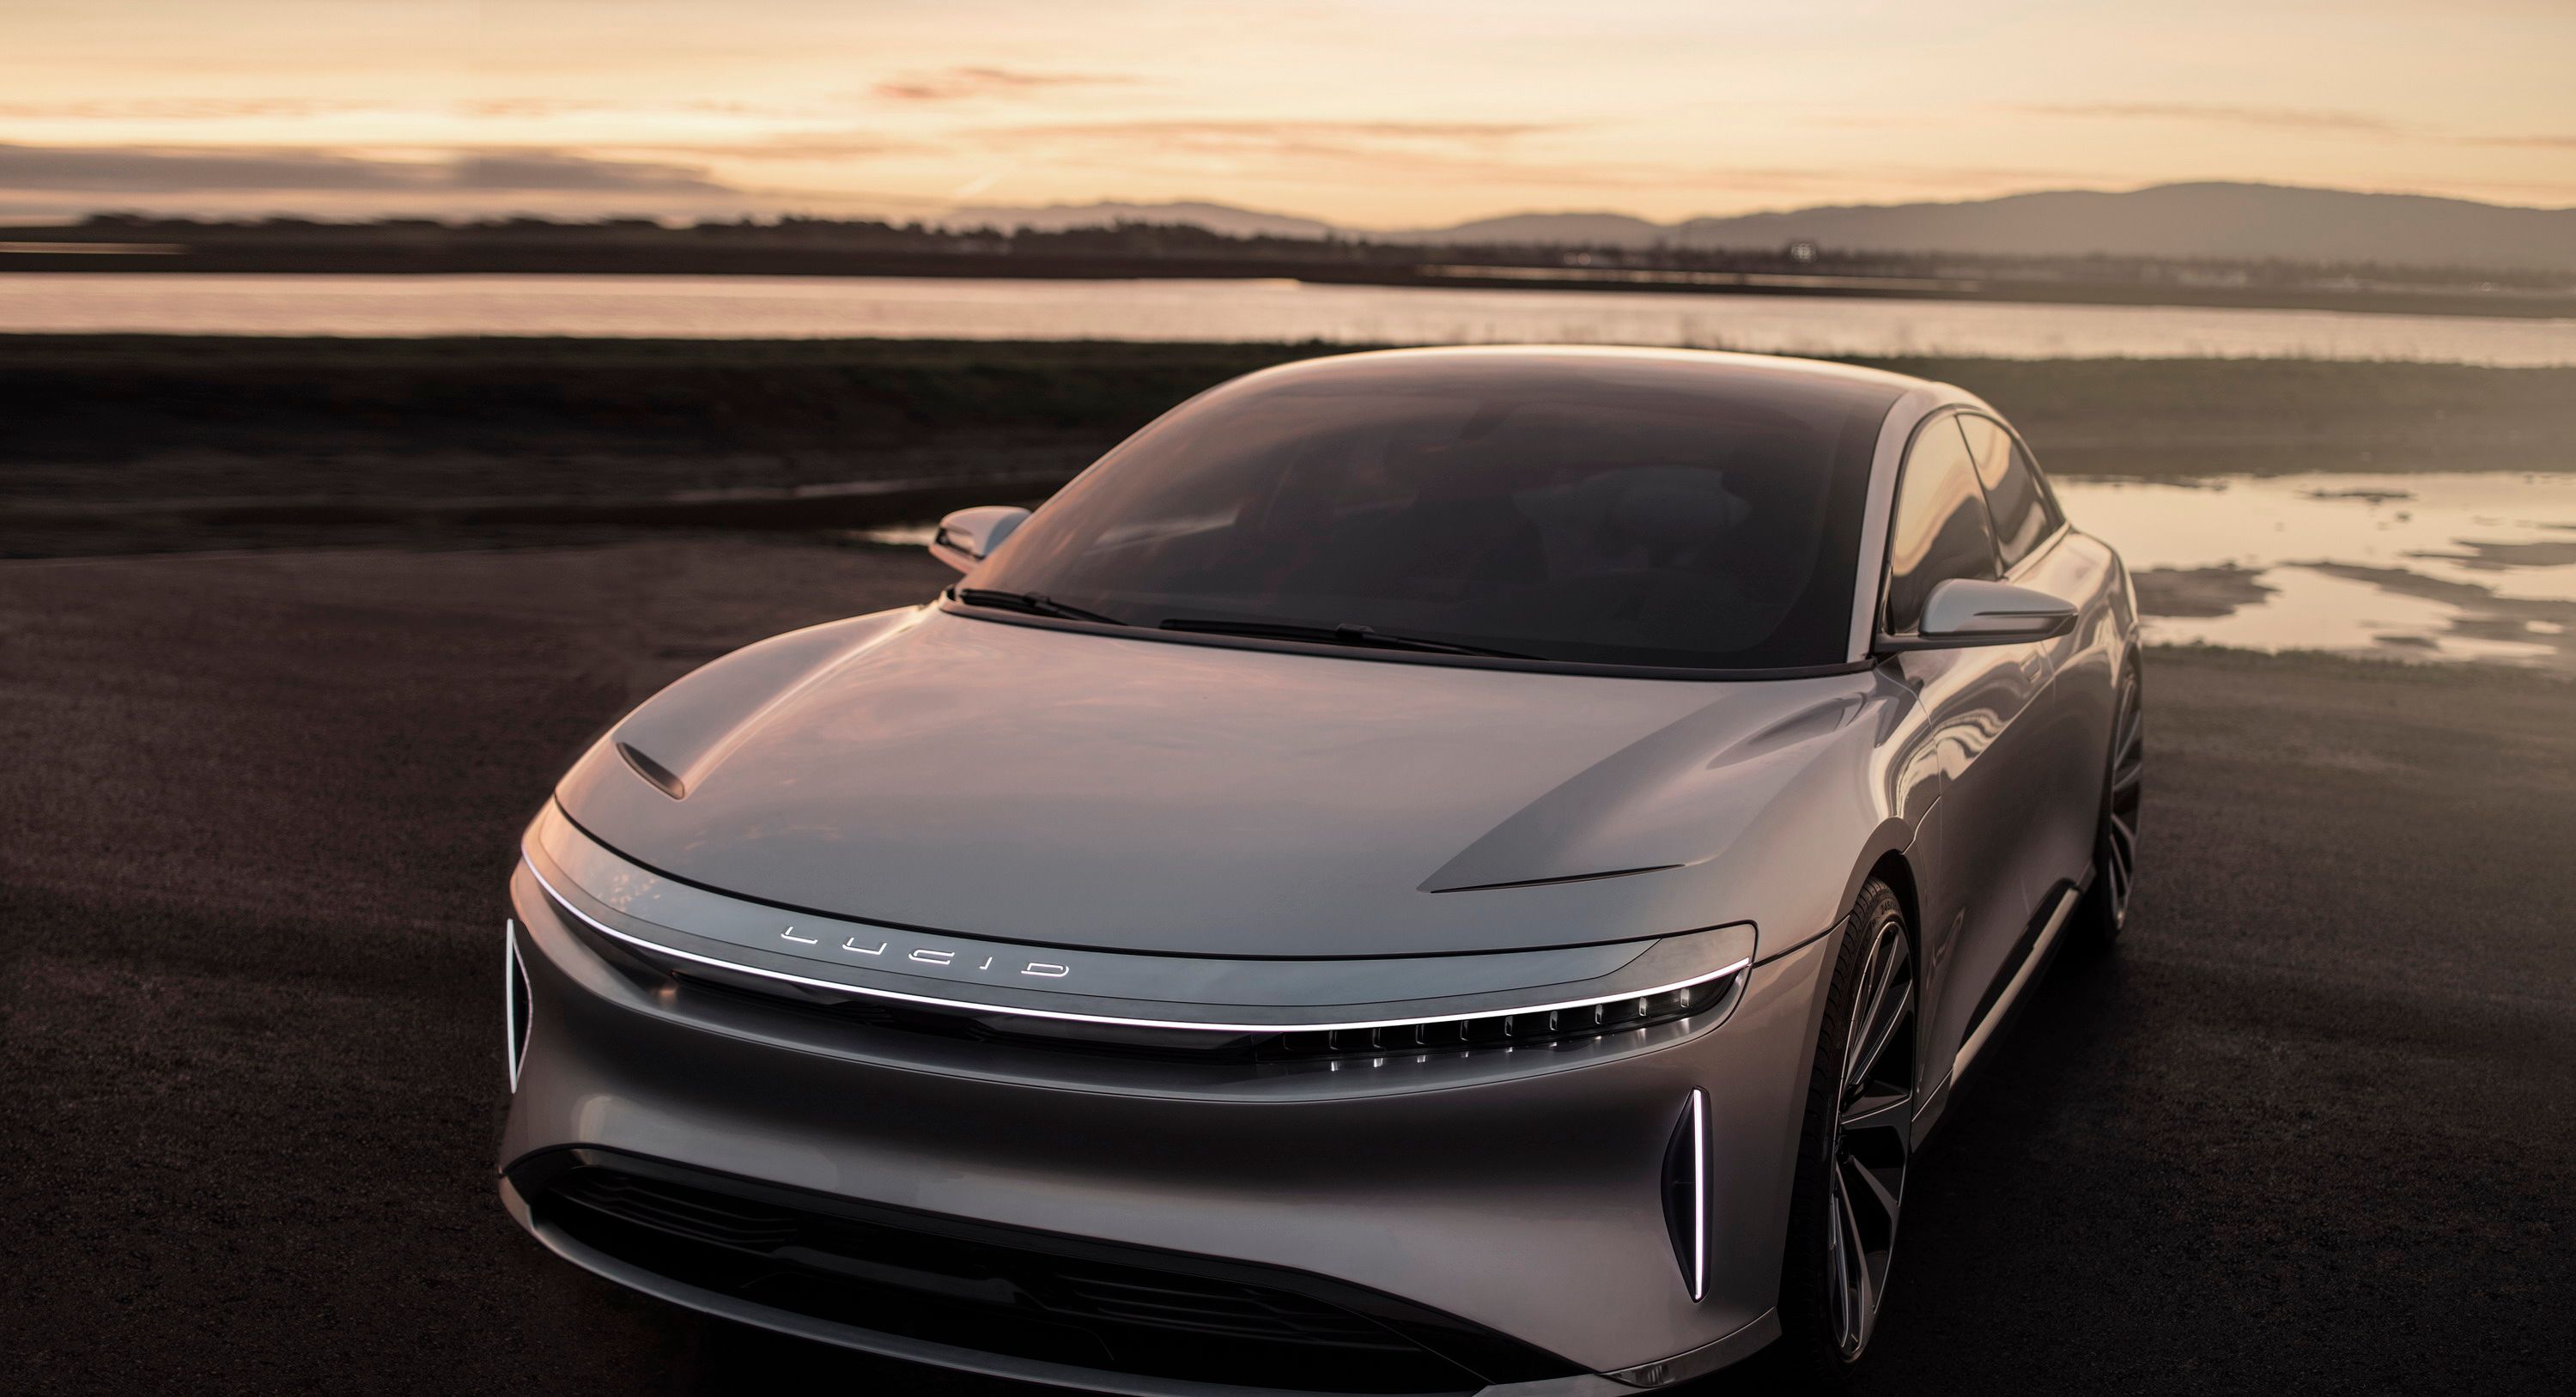 2020 Efficiency Watch: The 500-Mile Lucid Air Has a 113 kWh Battery Pack